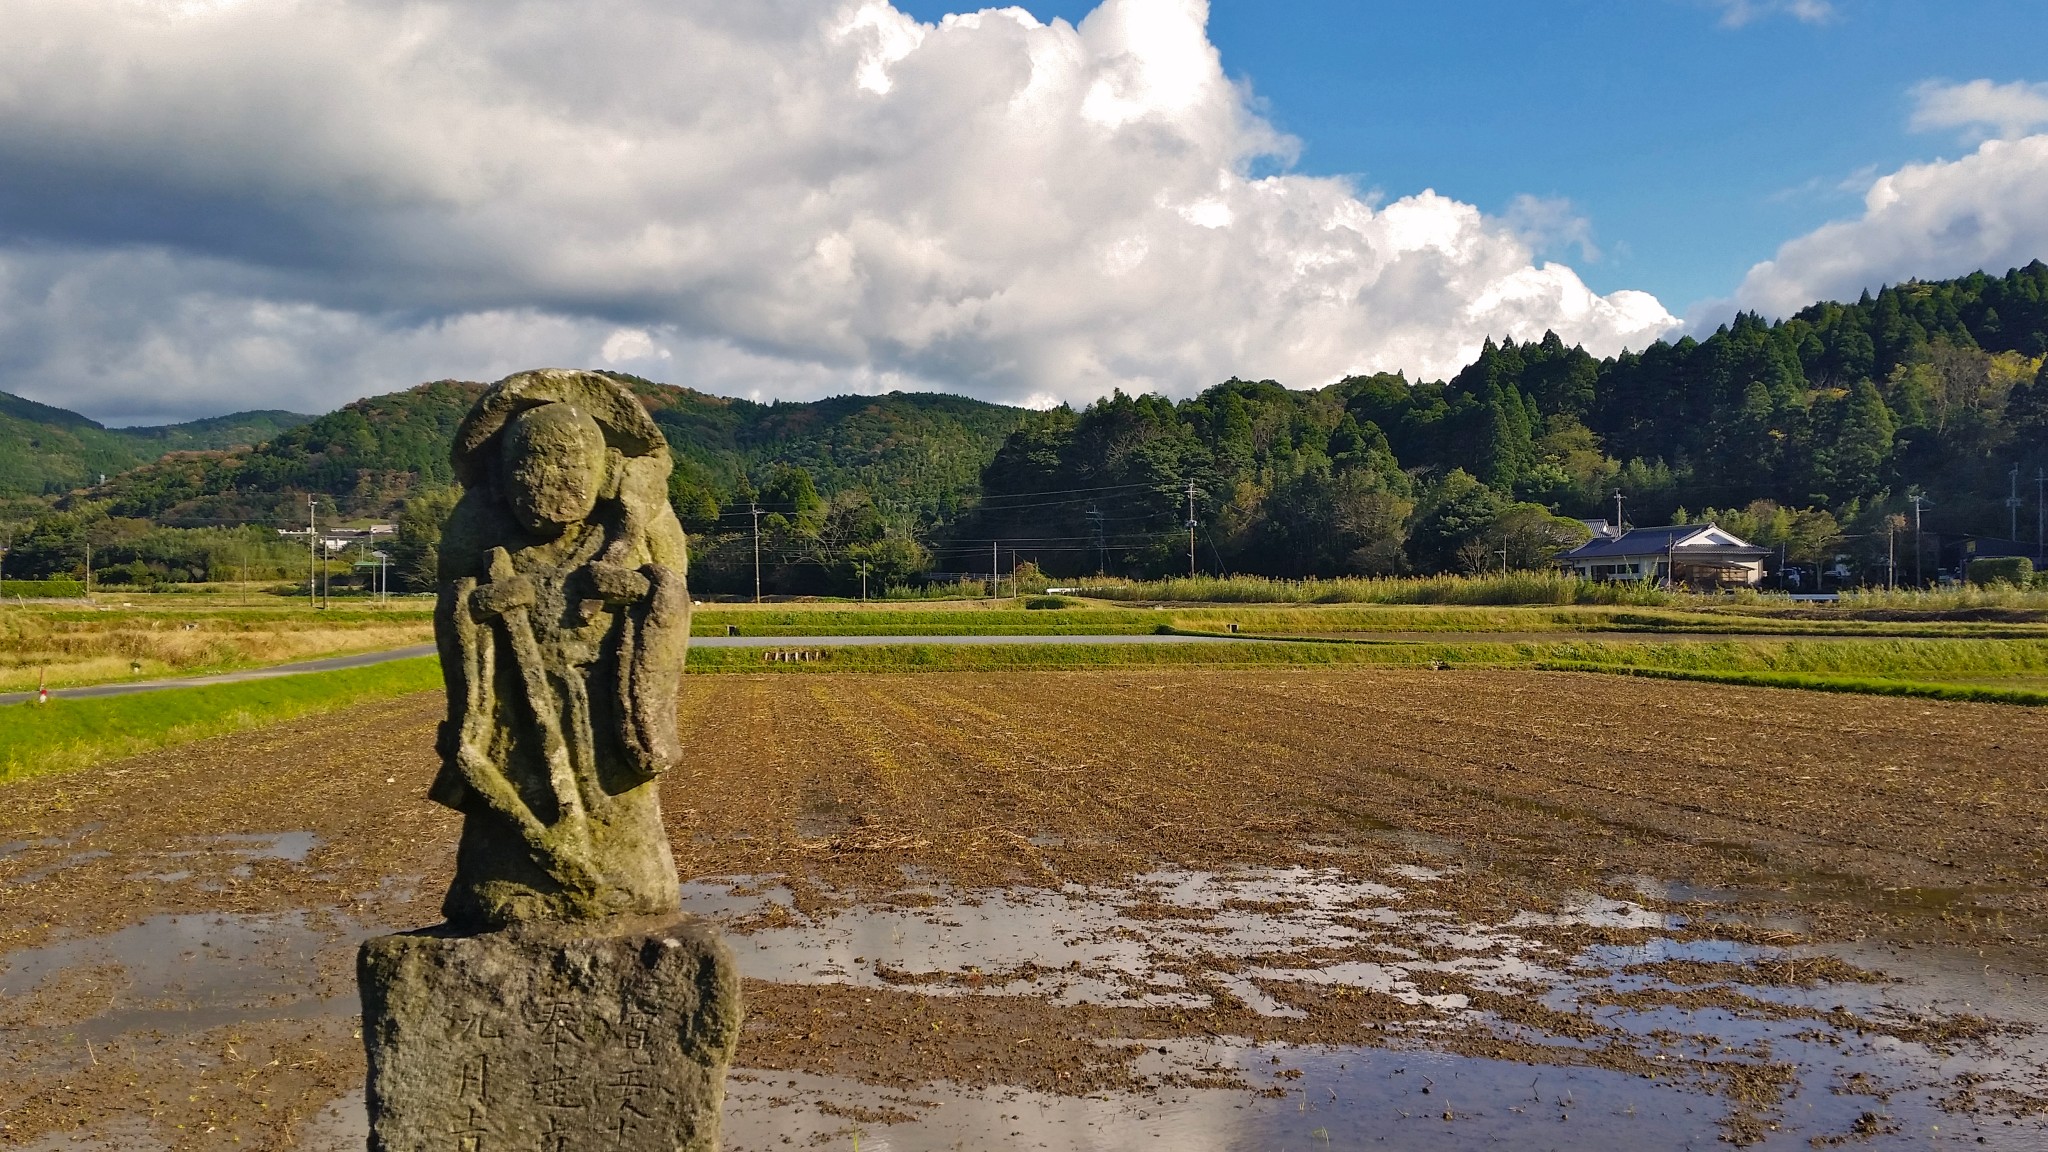 Looking for the Rice Gods – a Cycling Tour in Minamisatsuma